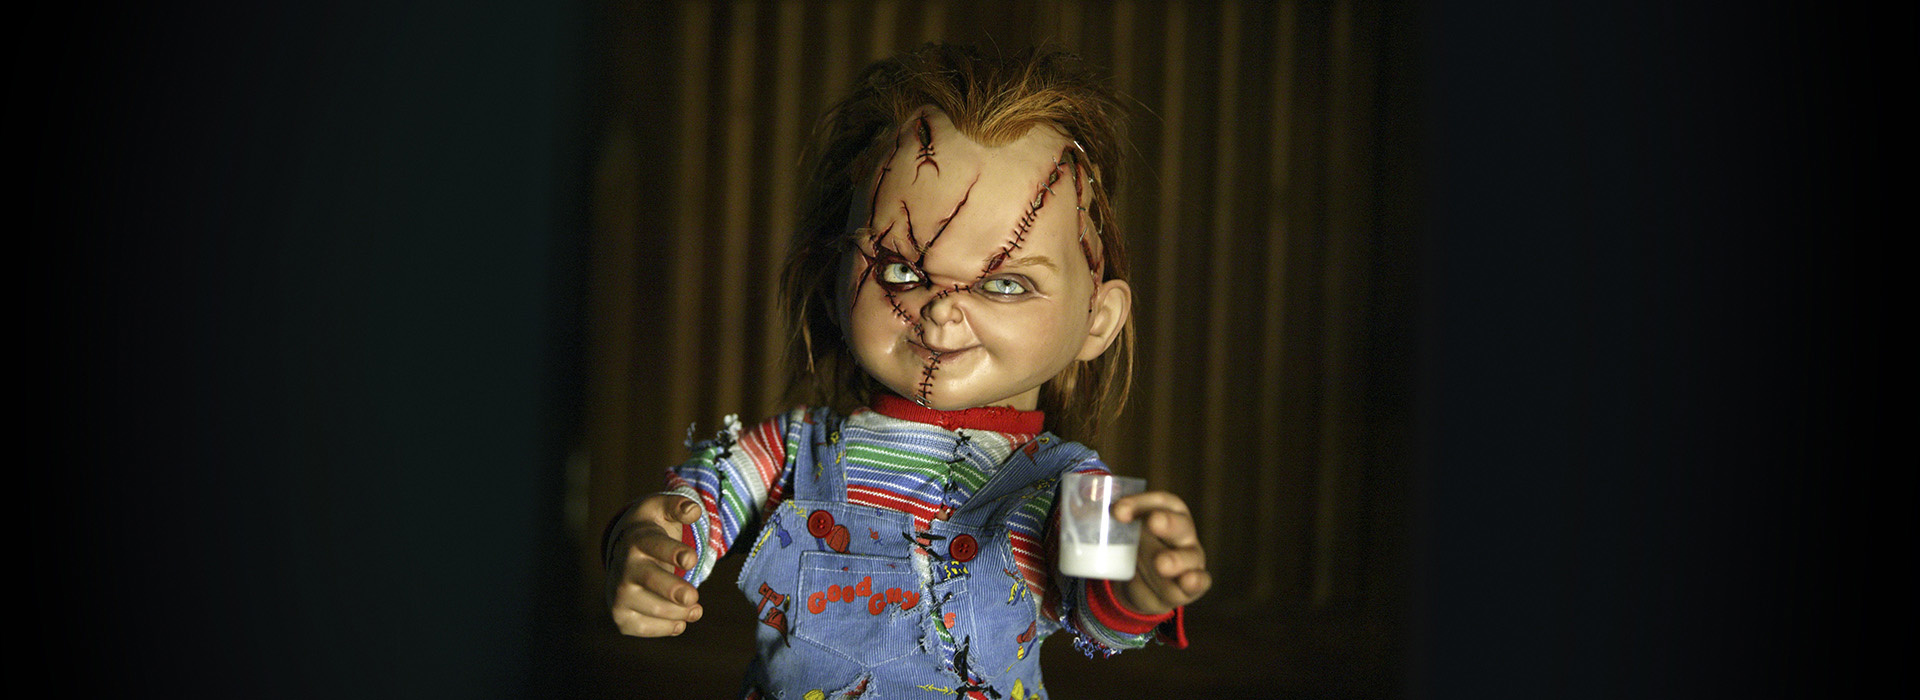 Movie poster Seed of Chucky